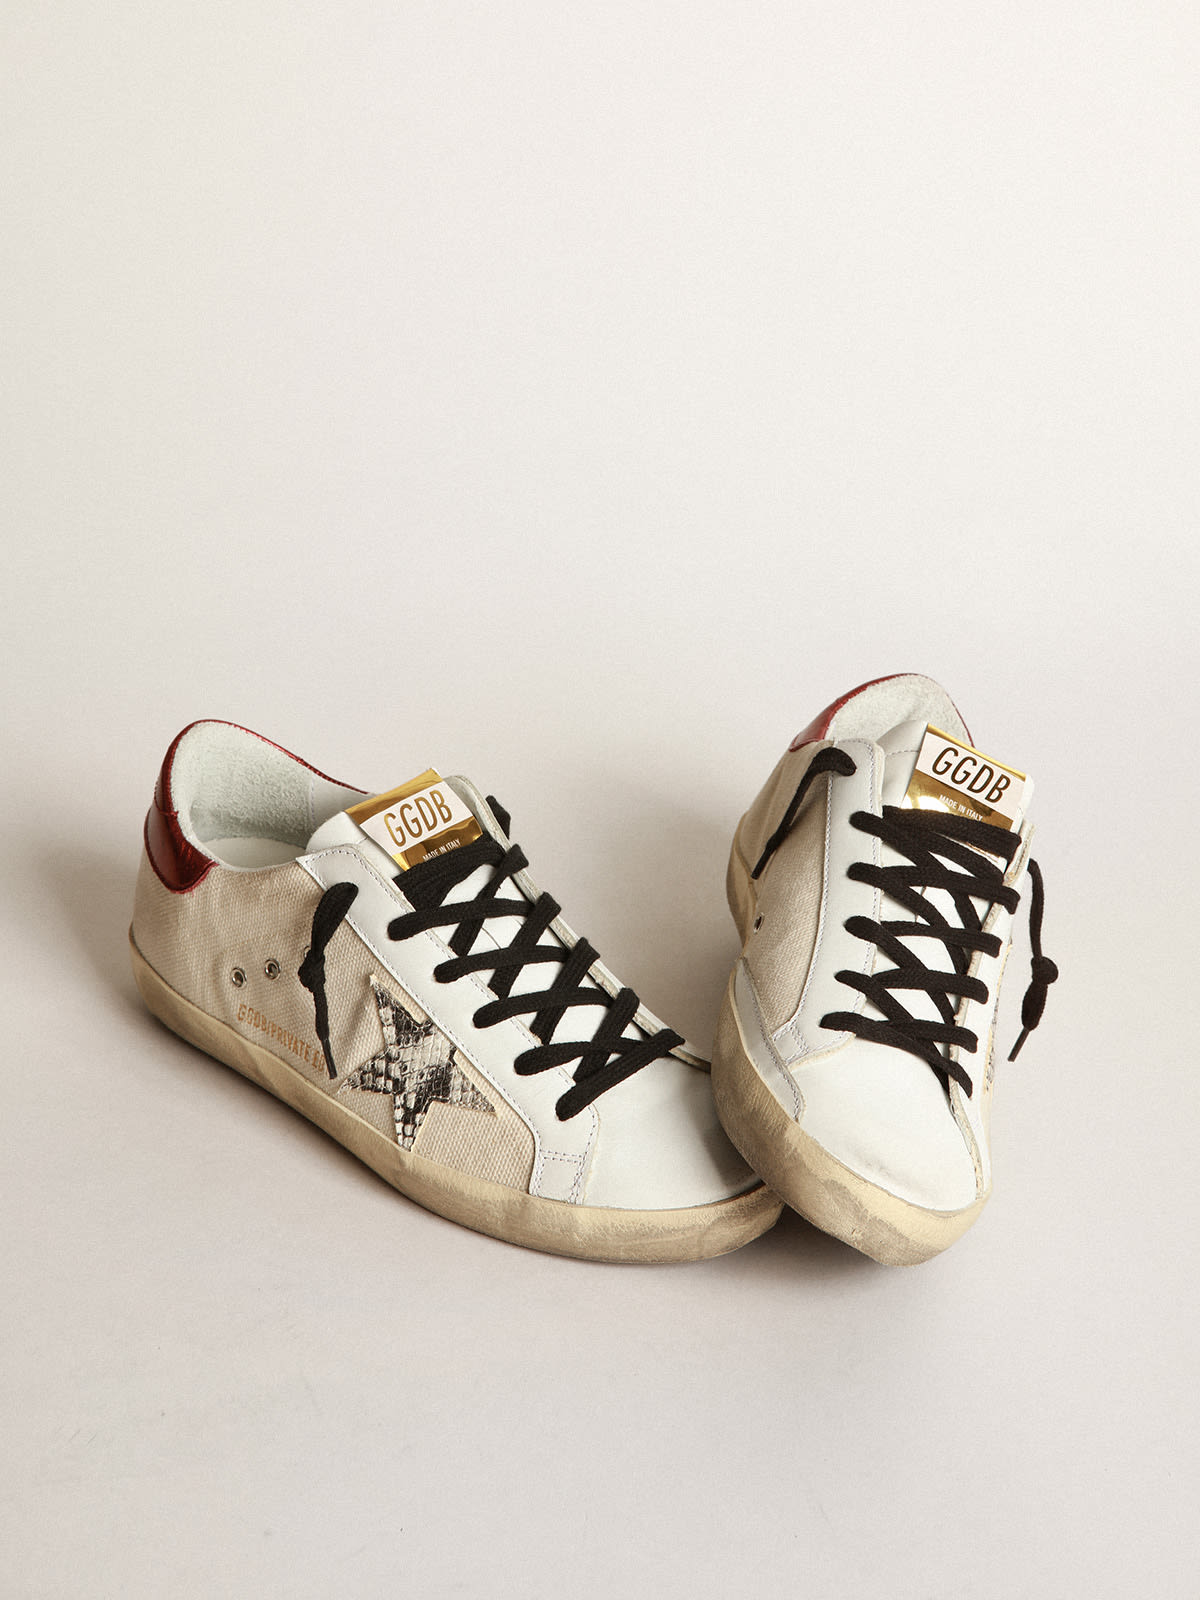 Golden Goose - Super-Star LTD sneakers in natural-white canvas with gray snake-print leather star and burgundy laminated leather heel tab in 